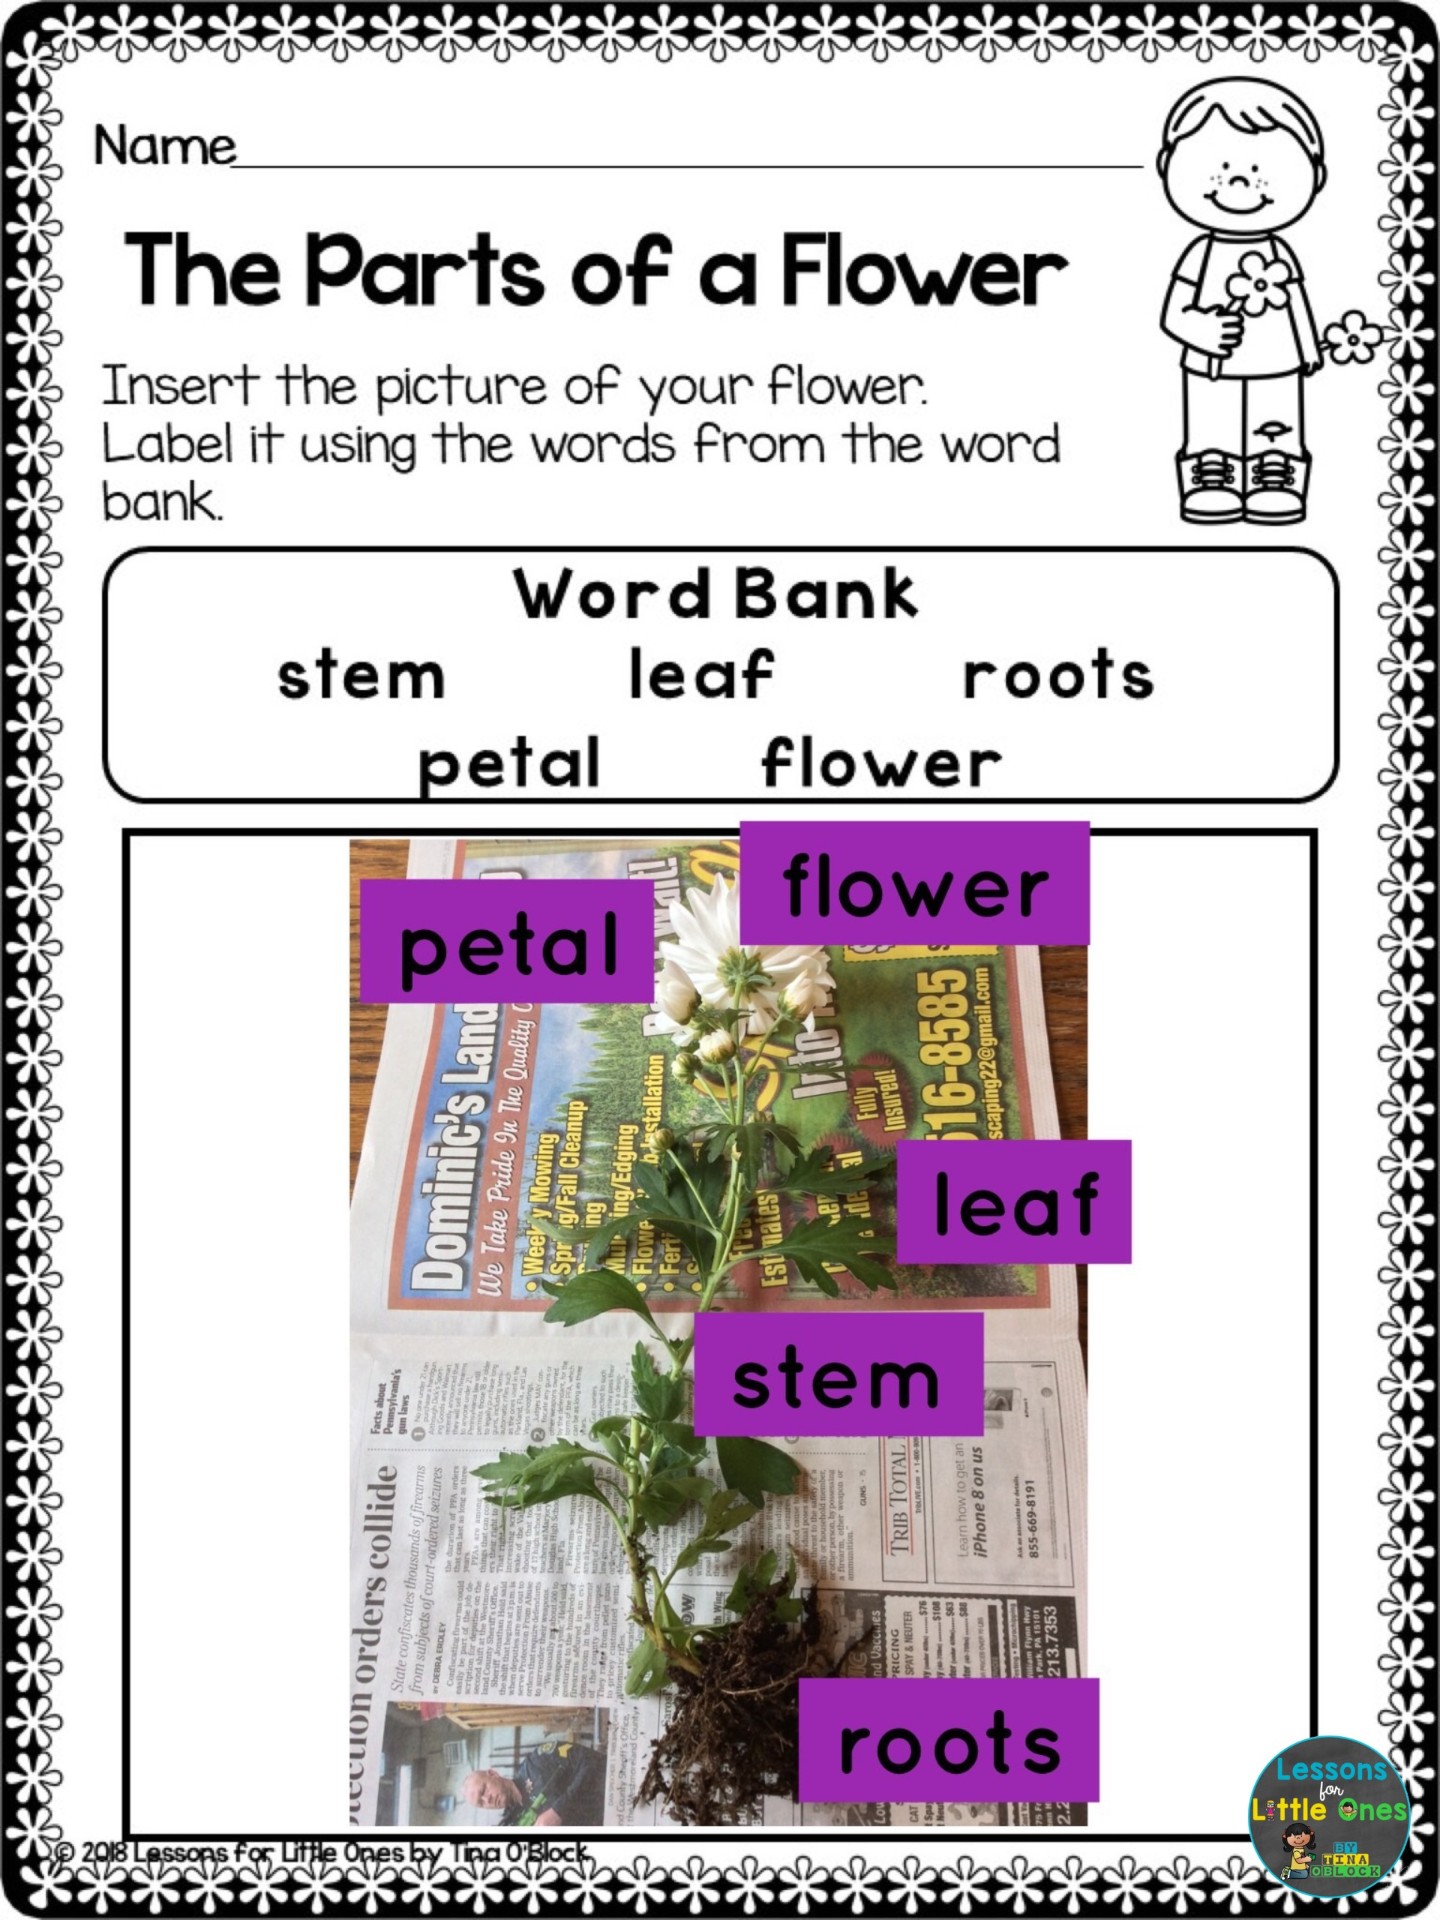 parts of a flower page using Pic Collage